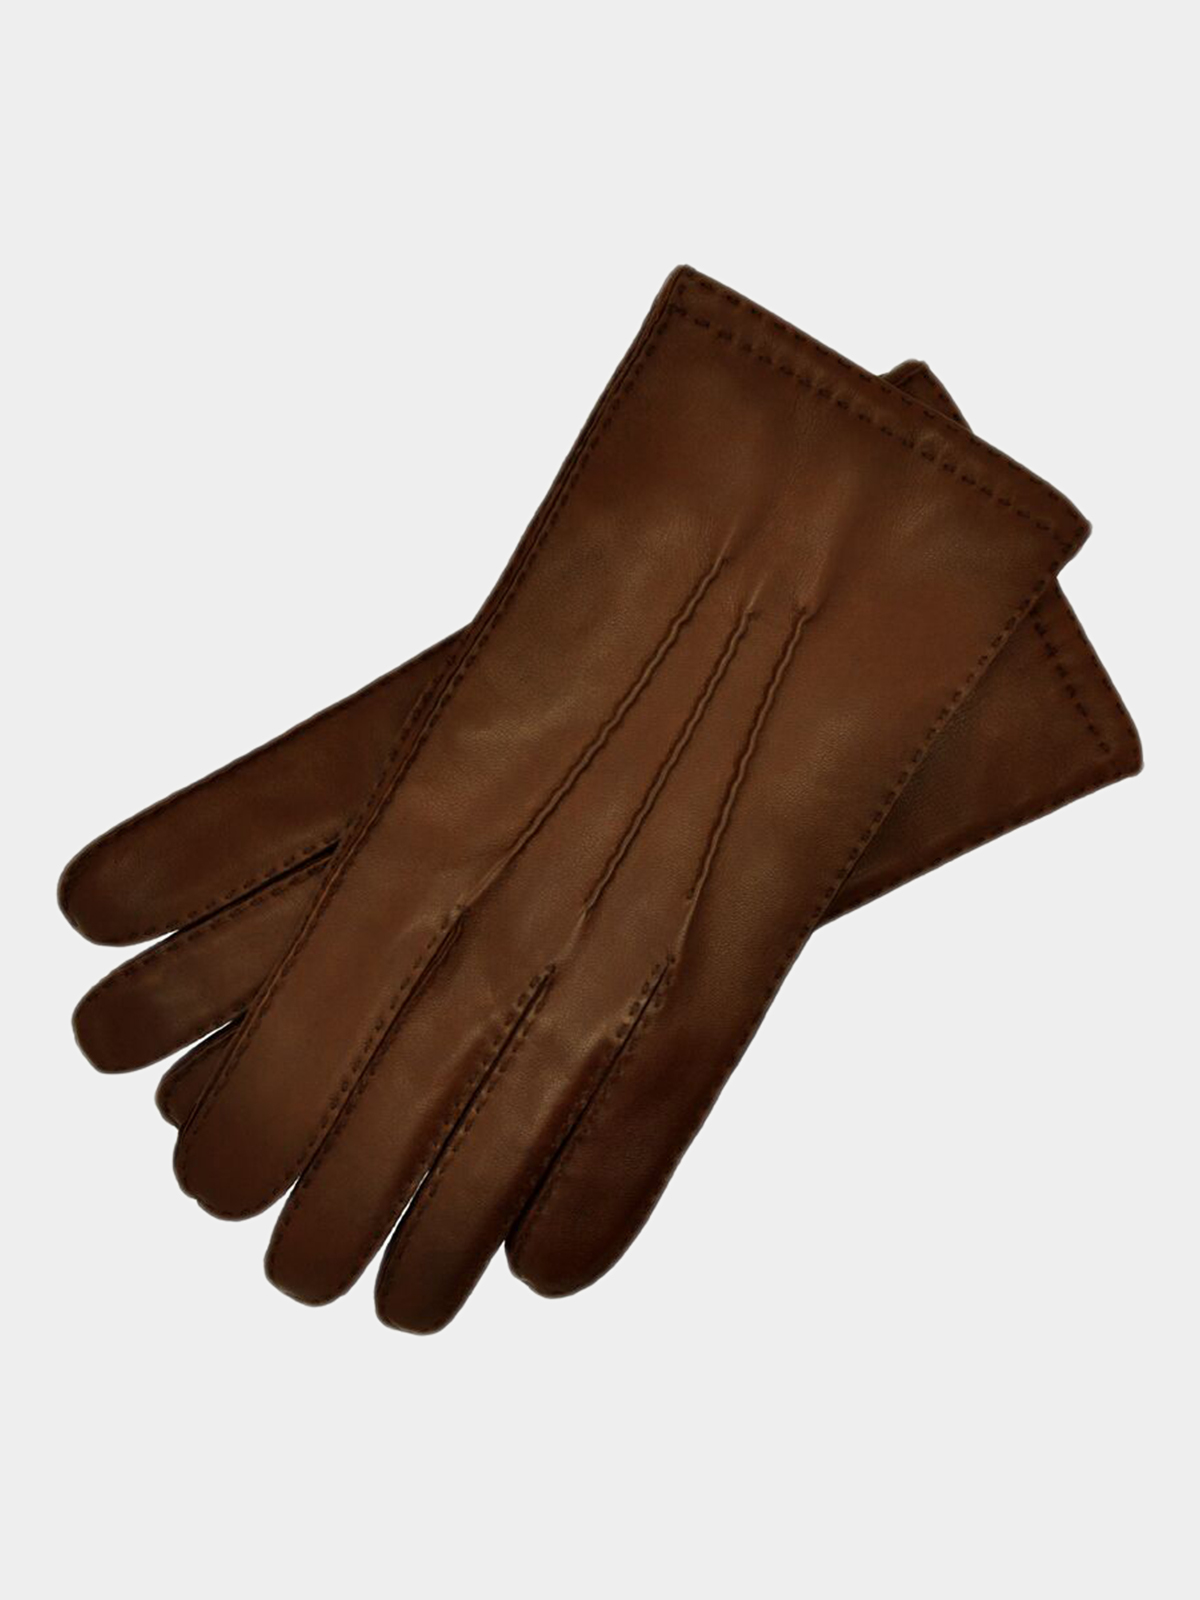 Brown Leather Gloves Mens Size 8